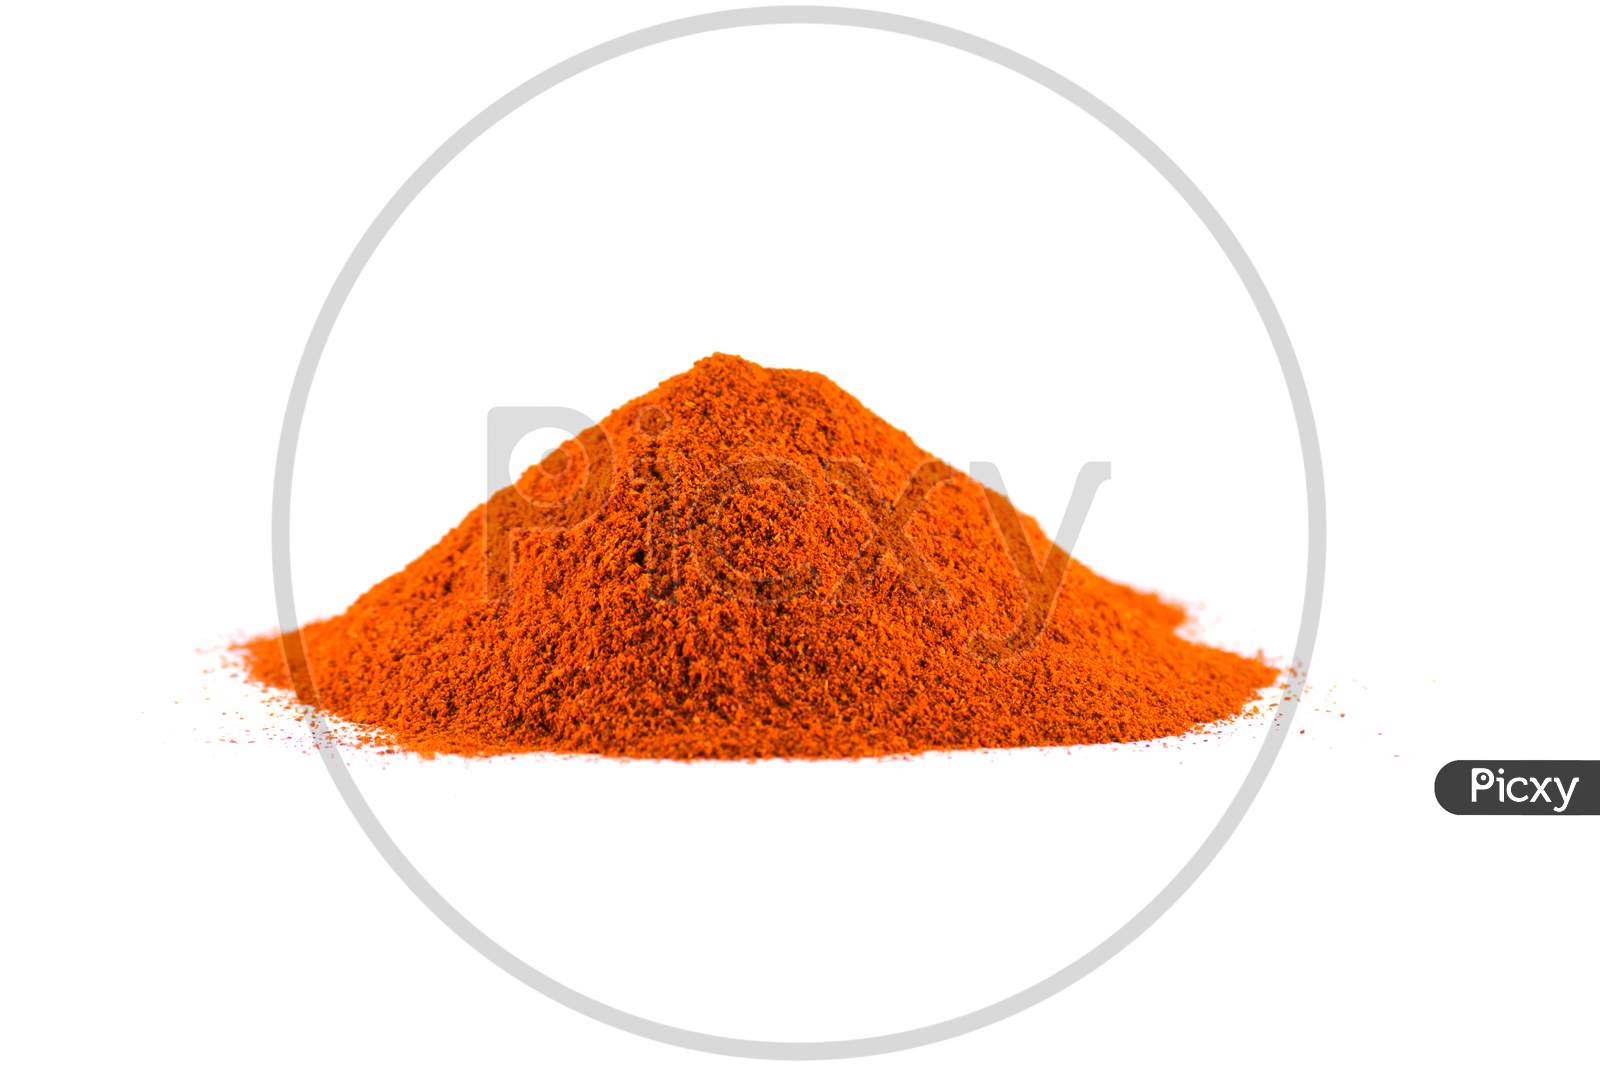 Red chili pepper powder isolated on white background